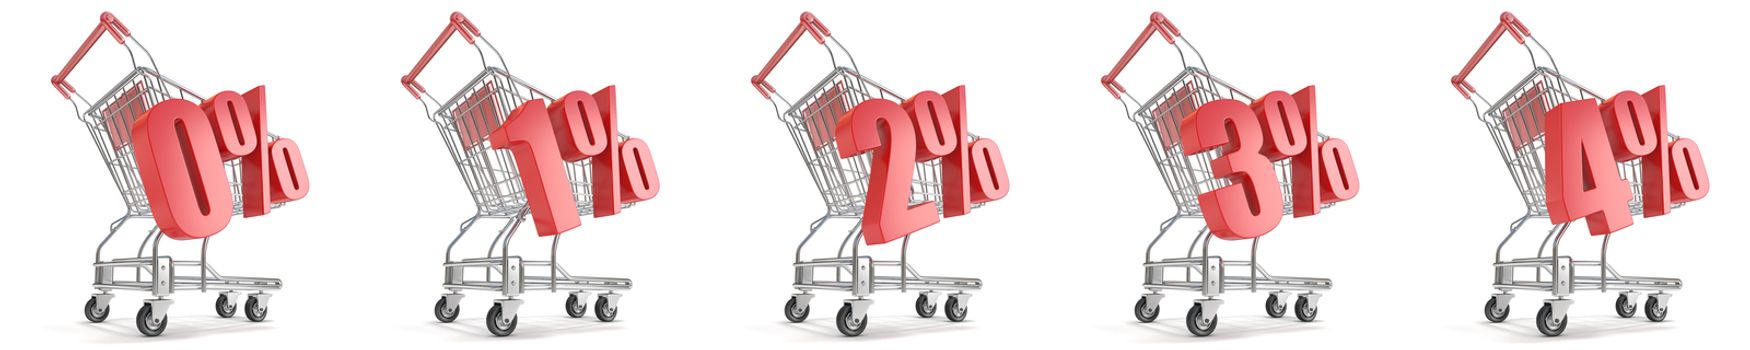 0%, 1%, 2%, 3%, 4%  percent discount in front of shopping cart. Sale concept. 3D render illustration isolated on white background